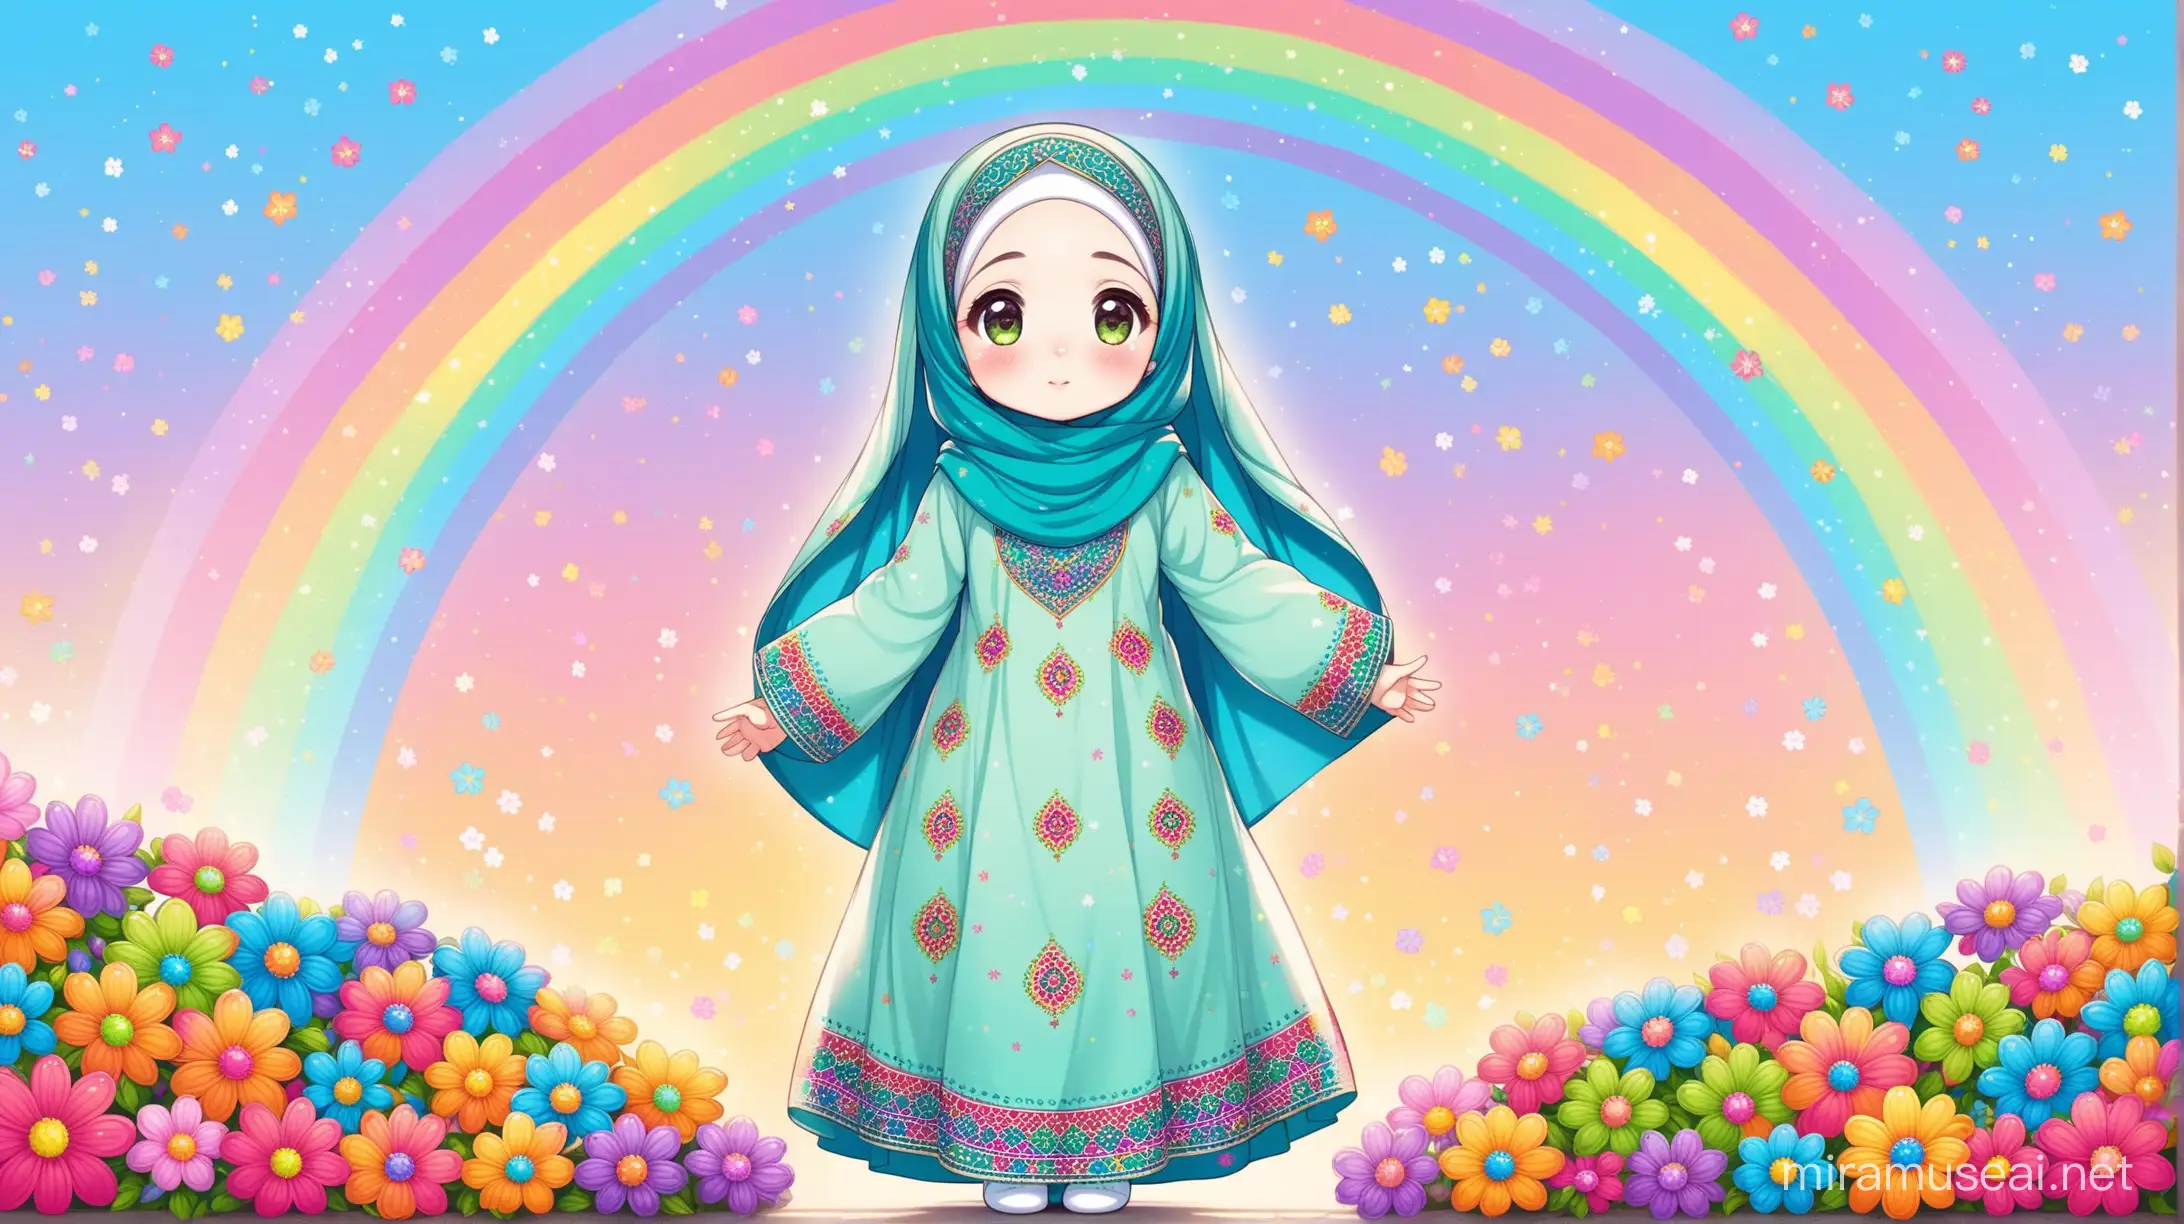 Persian little girl(full height, Muslim, with emphasis no hair out of veil(Hijab), white skin, cute, wearing socks, clothes full of Persian designs).
Ground and background full of rainbow flowers.